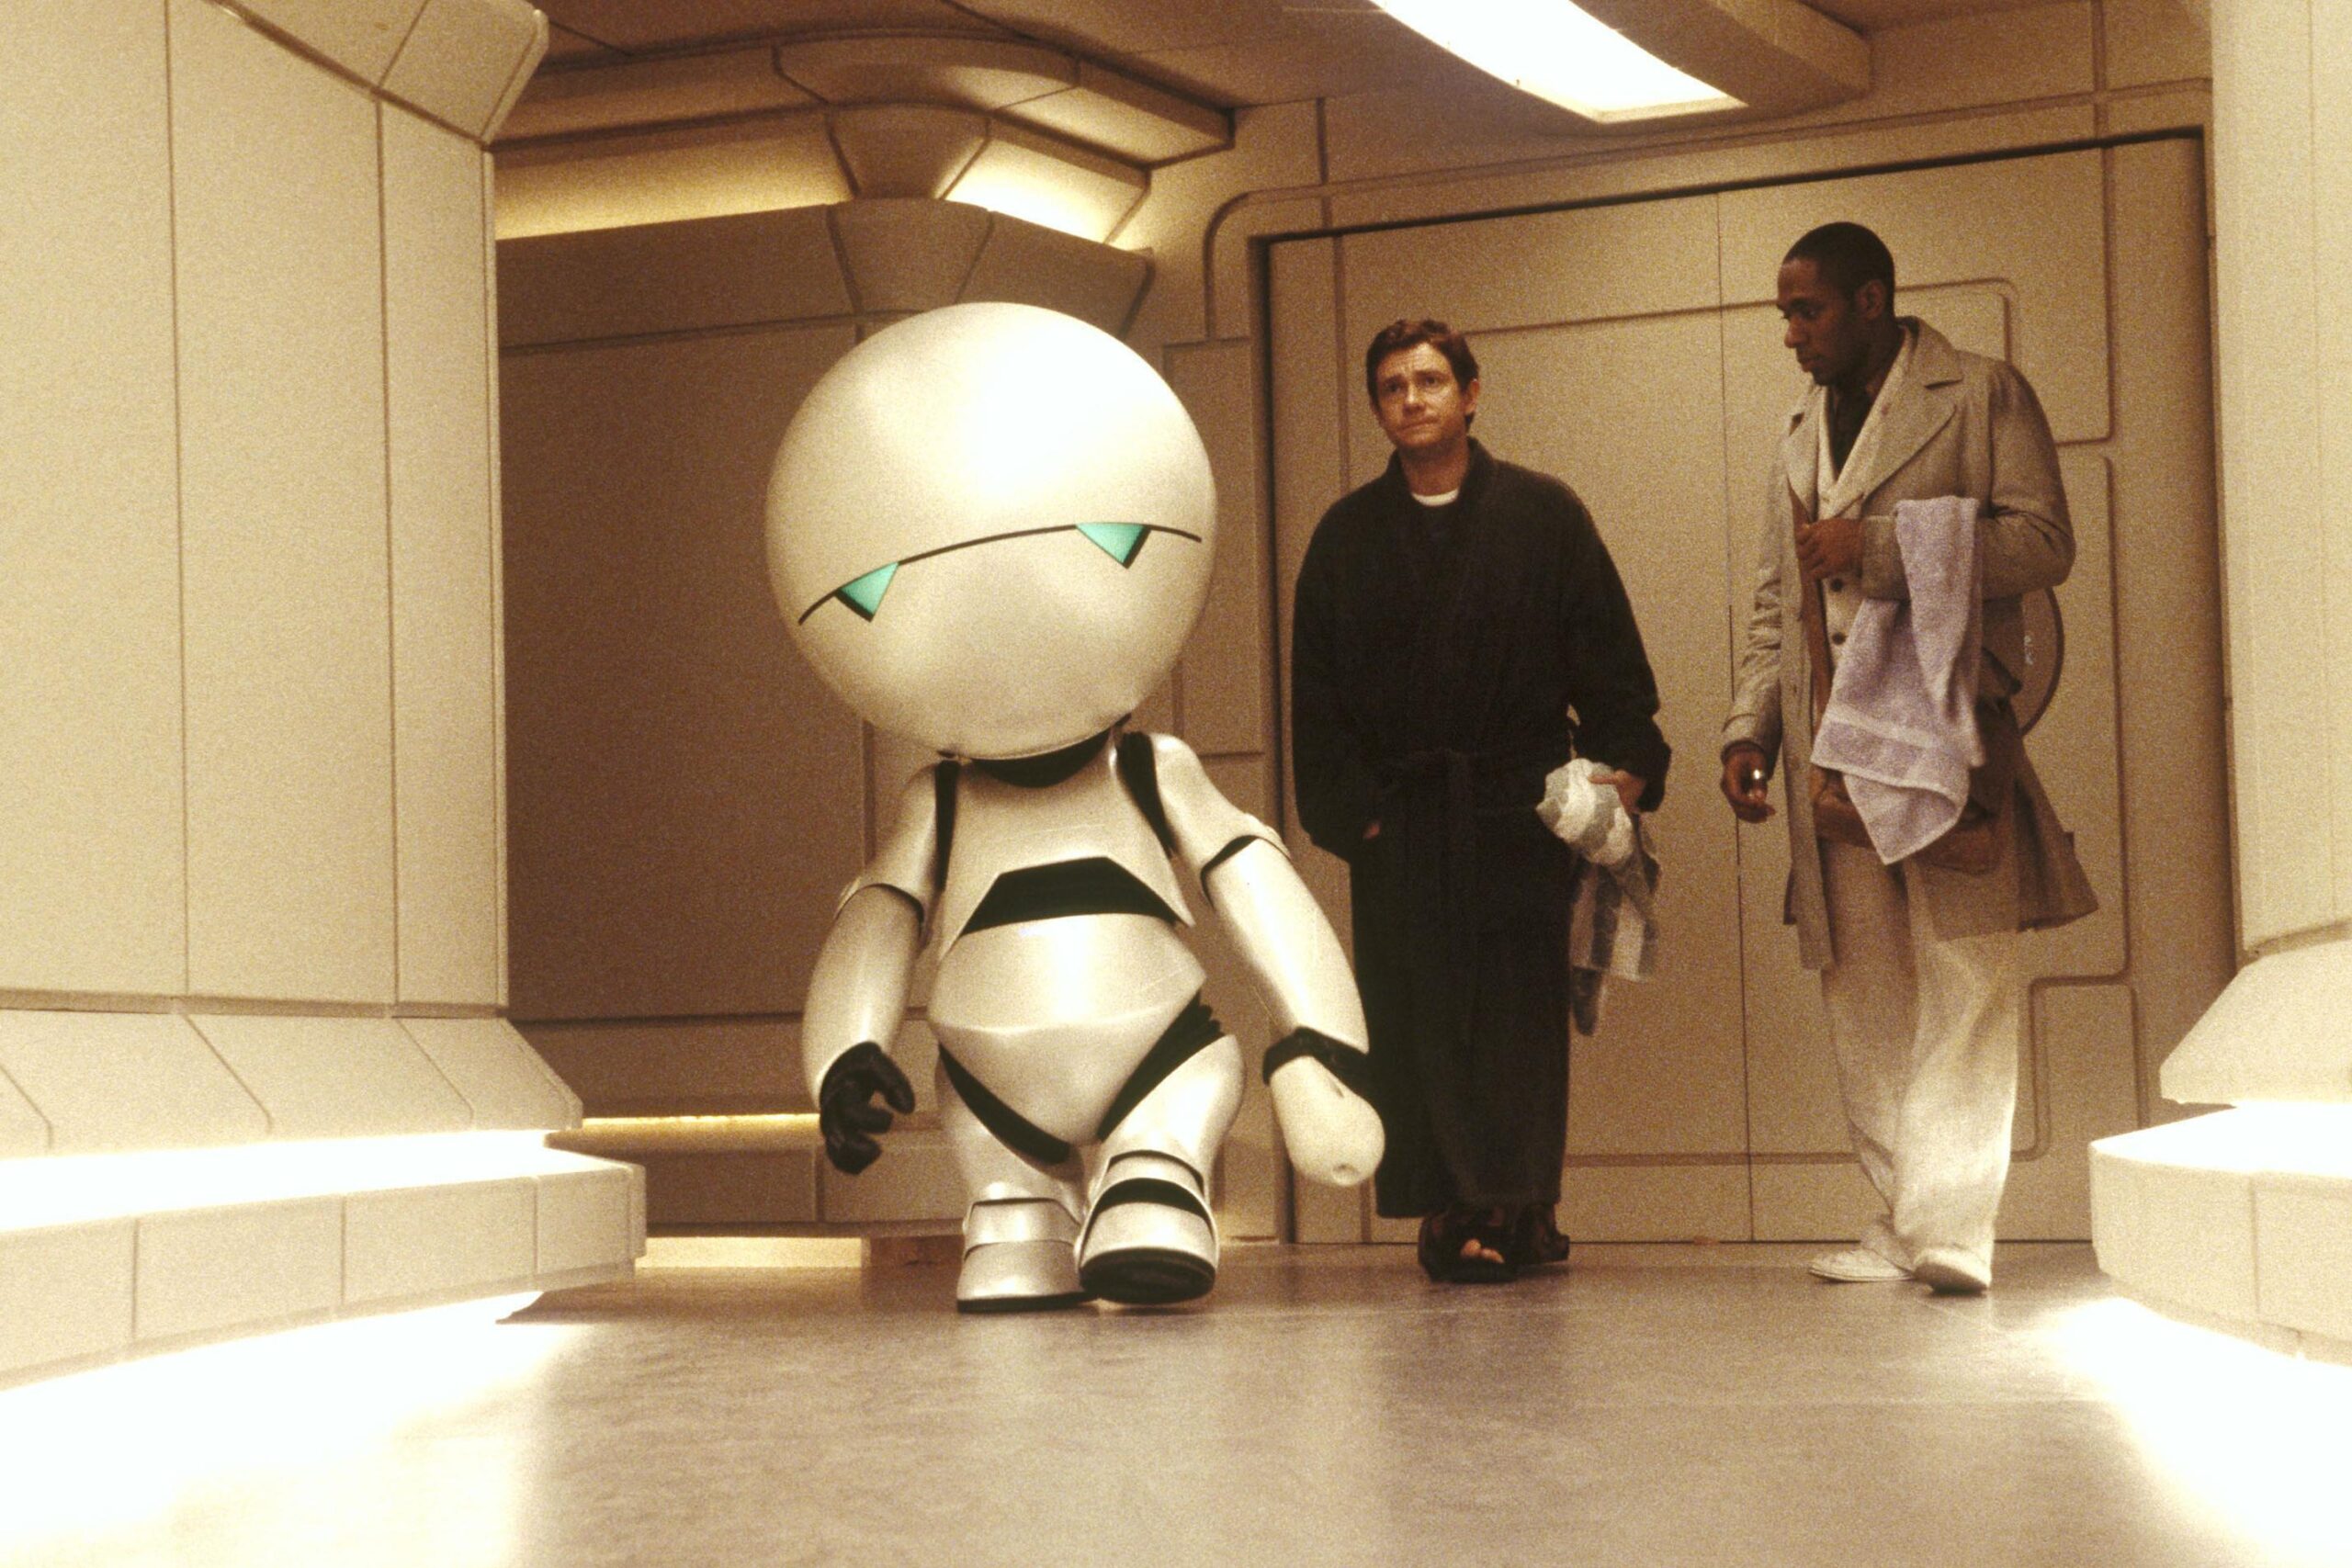 Marvin the Paranoid Android from Hitchhiker's Guide to the Galaxy